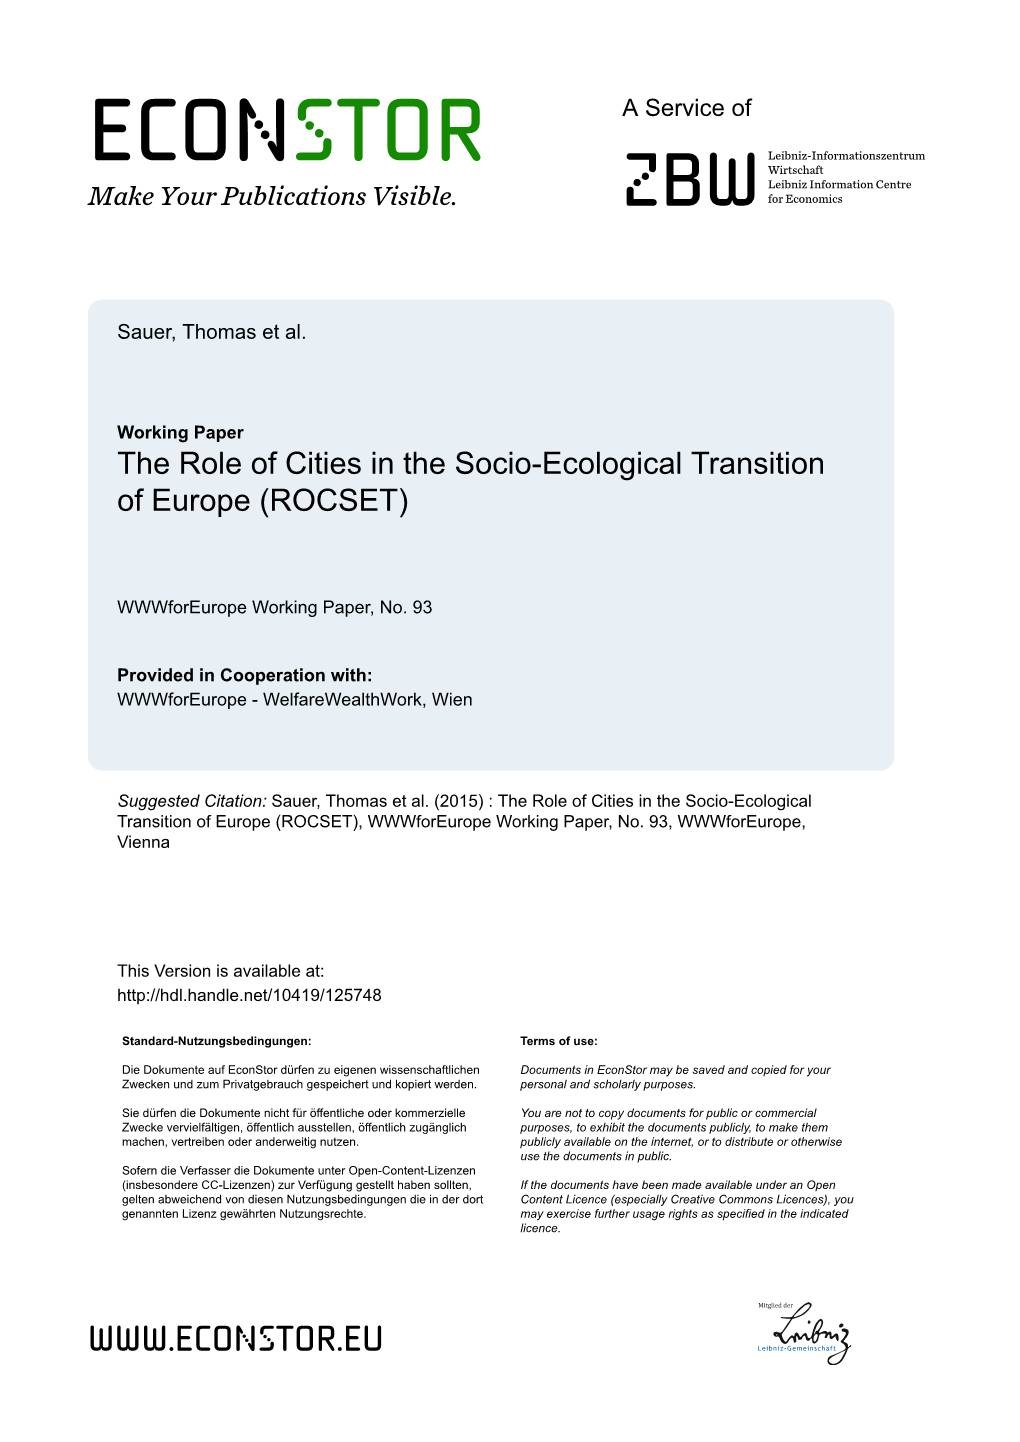 The Role of Cities in the Socio-Ecological Transition of Europe (ROCSET)